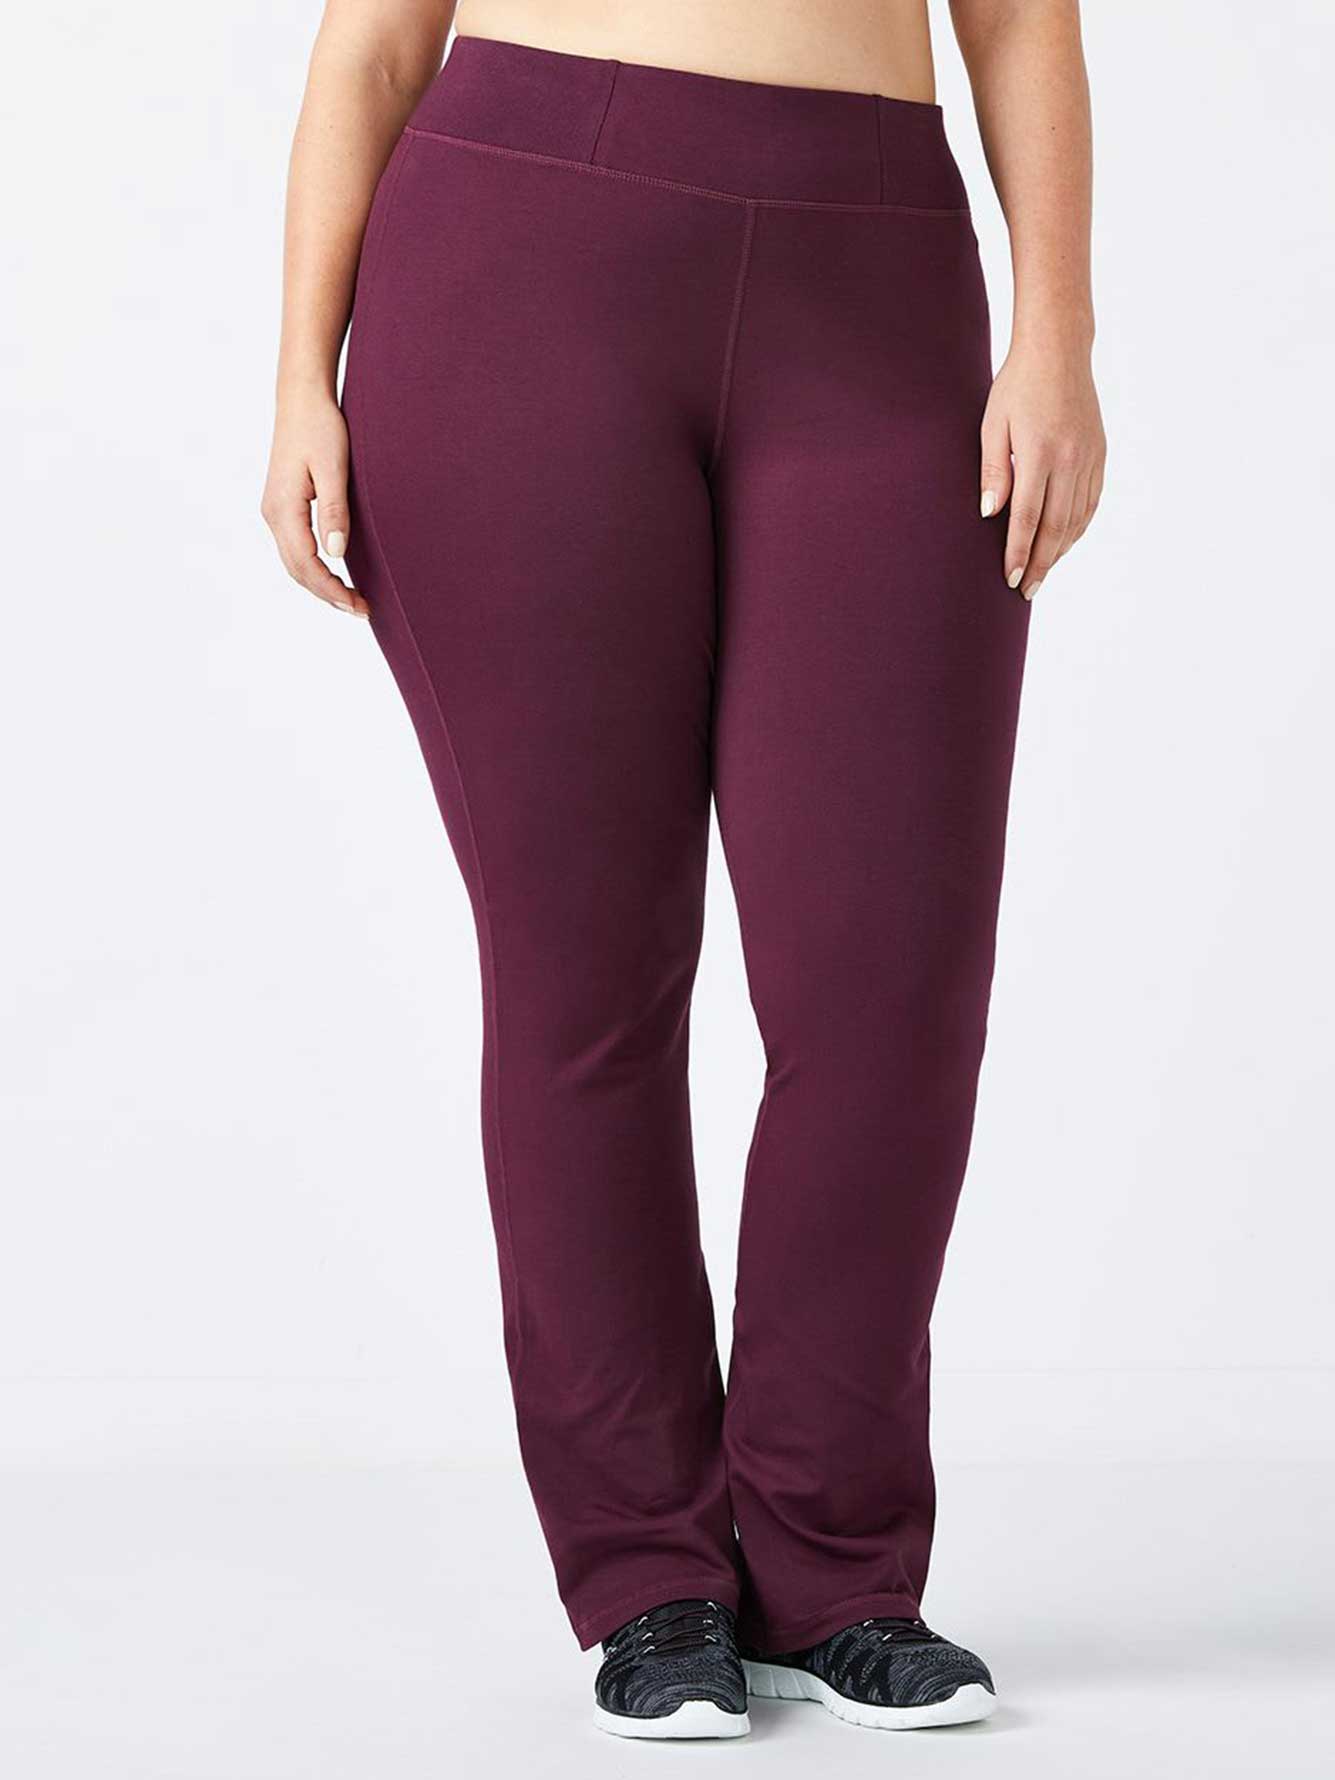 Yoga Pants In Petite Length  International Society of Precision Agriculture